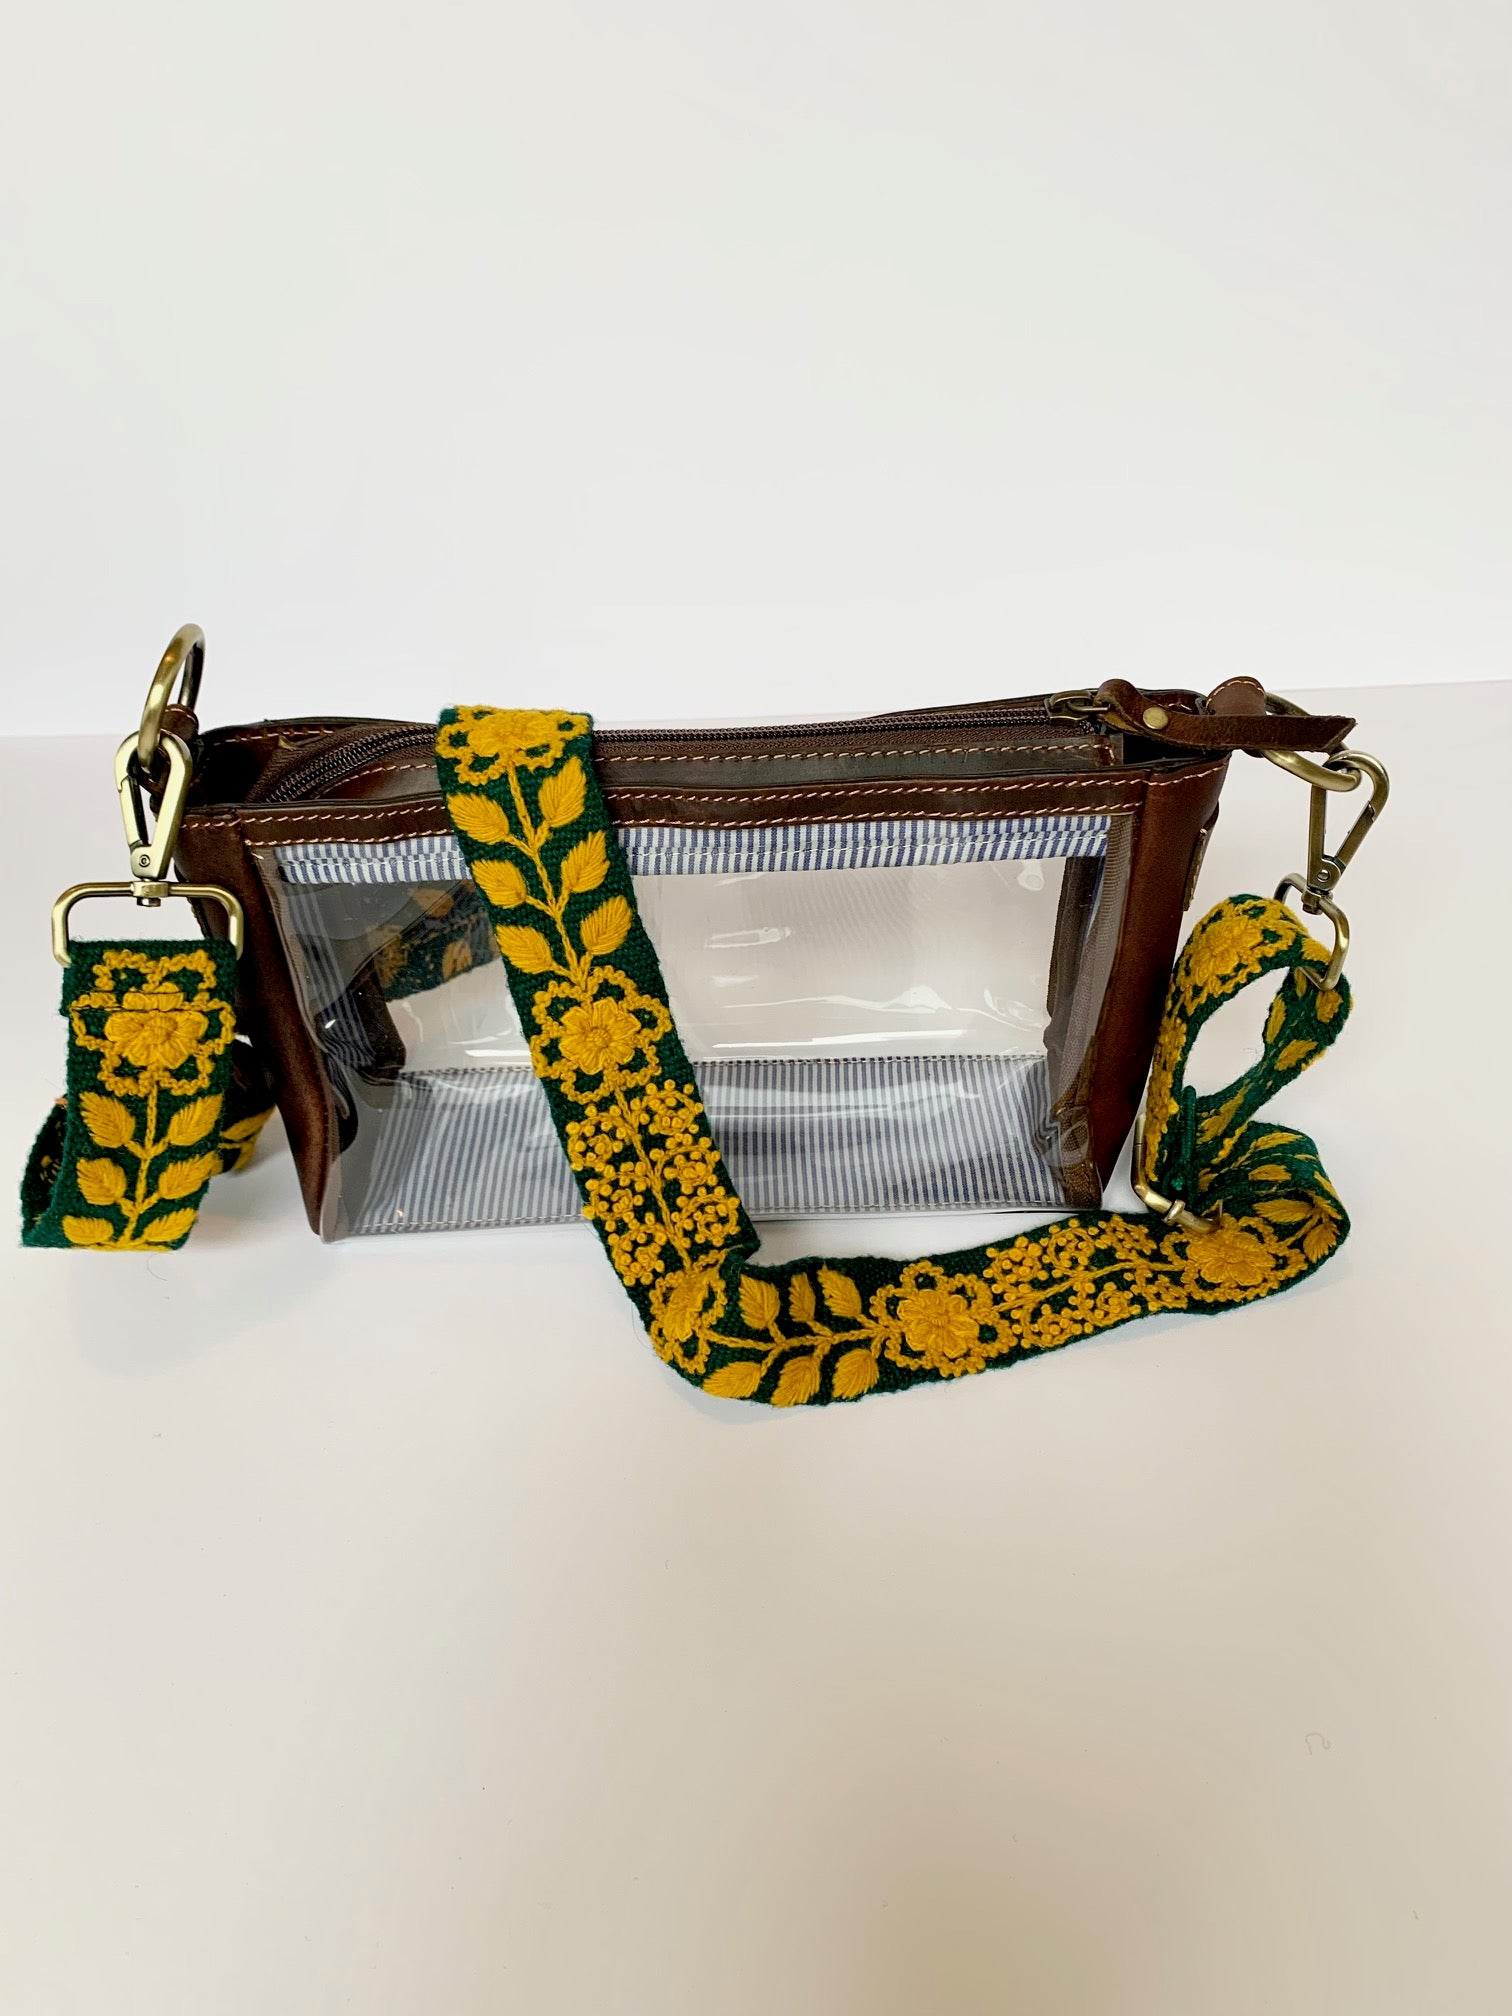 Alison Adjustable Purse Strap, green and gold floral and leaf design attached to a fair trade clear bag 